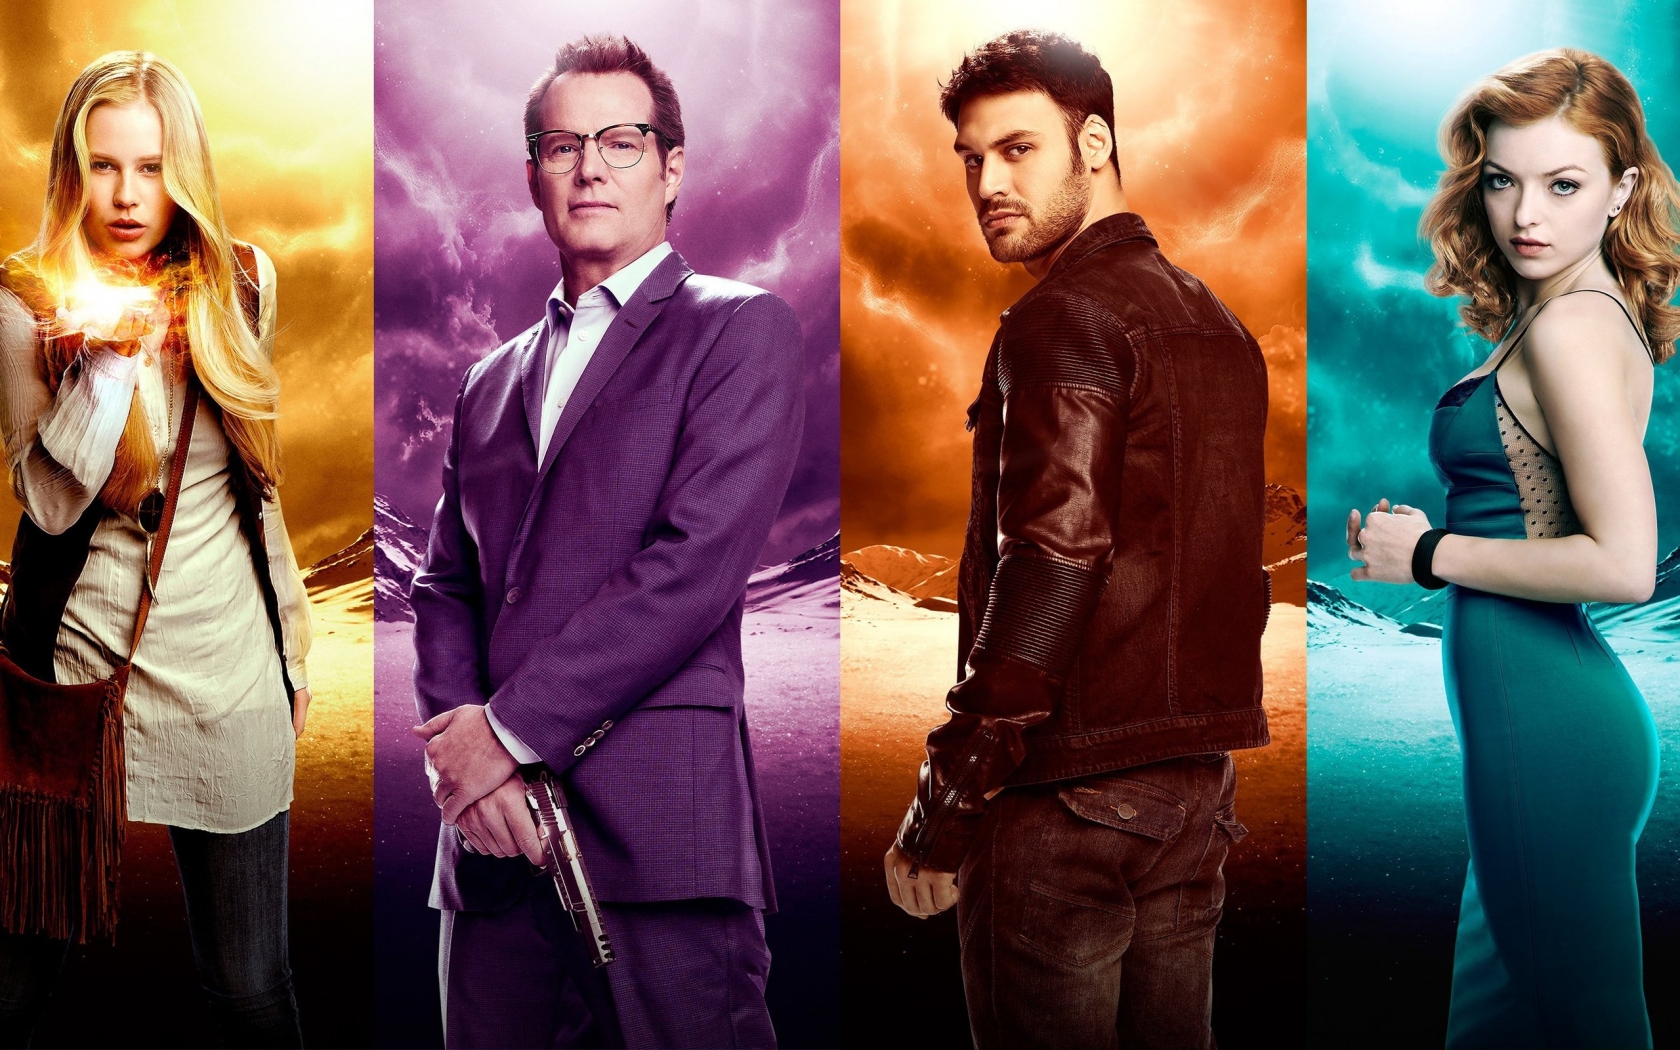 Heroes Reborn Cast for 1680 x 1050 widescreen resolution